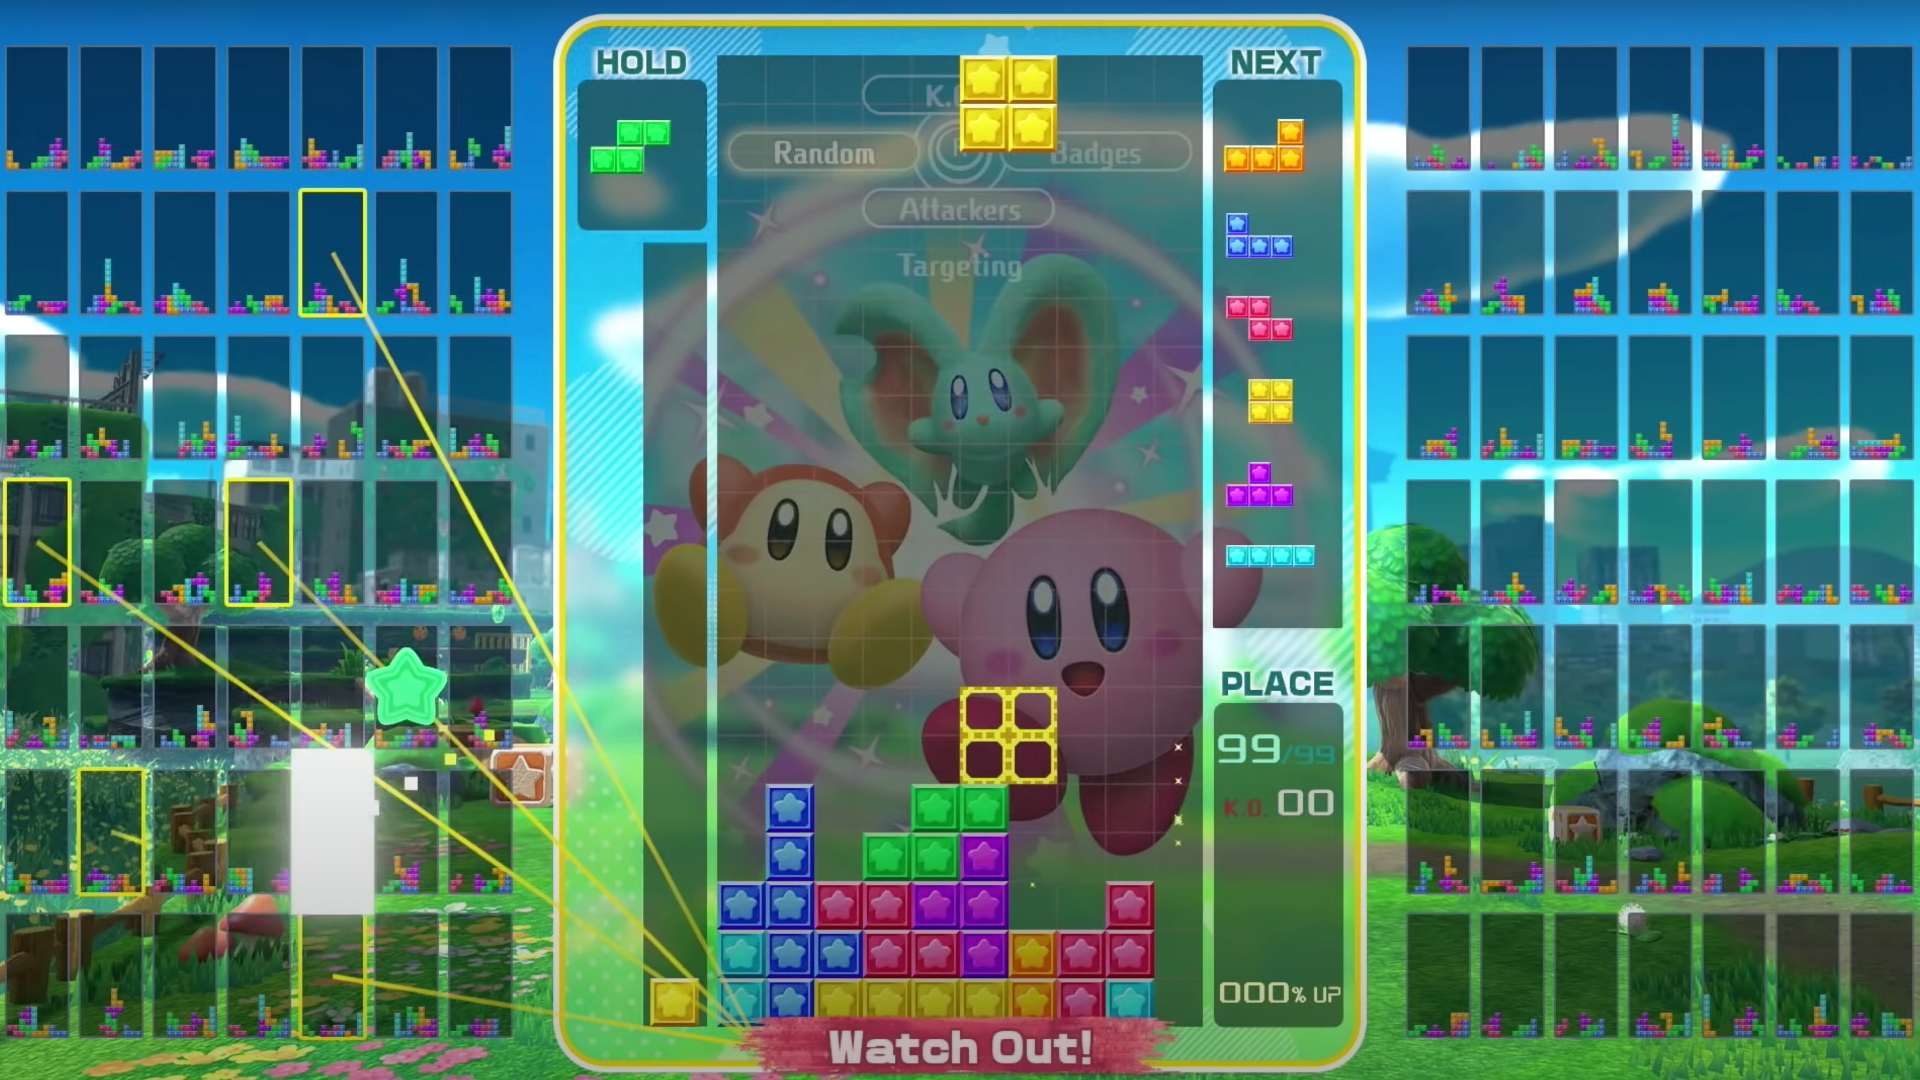 Free Nintendo Switch games: s99 players fight it out in Tetris 99